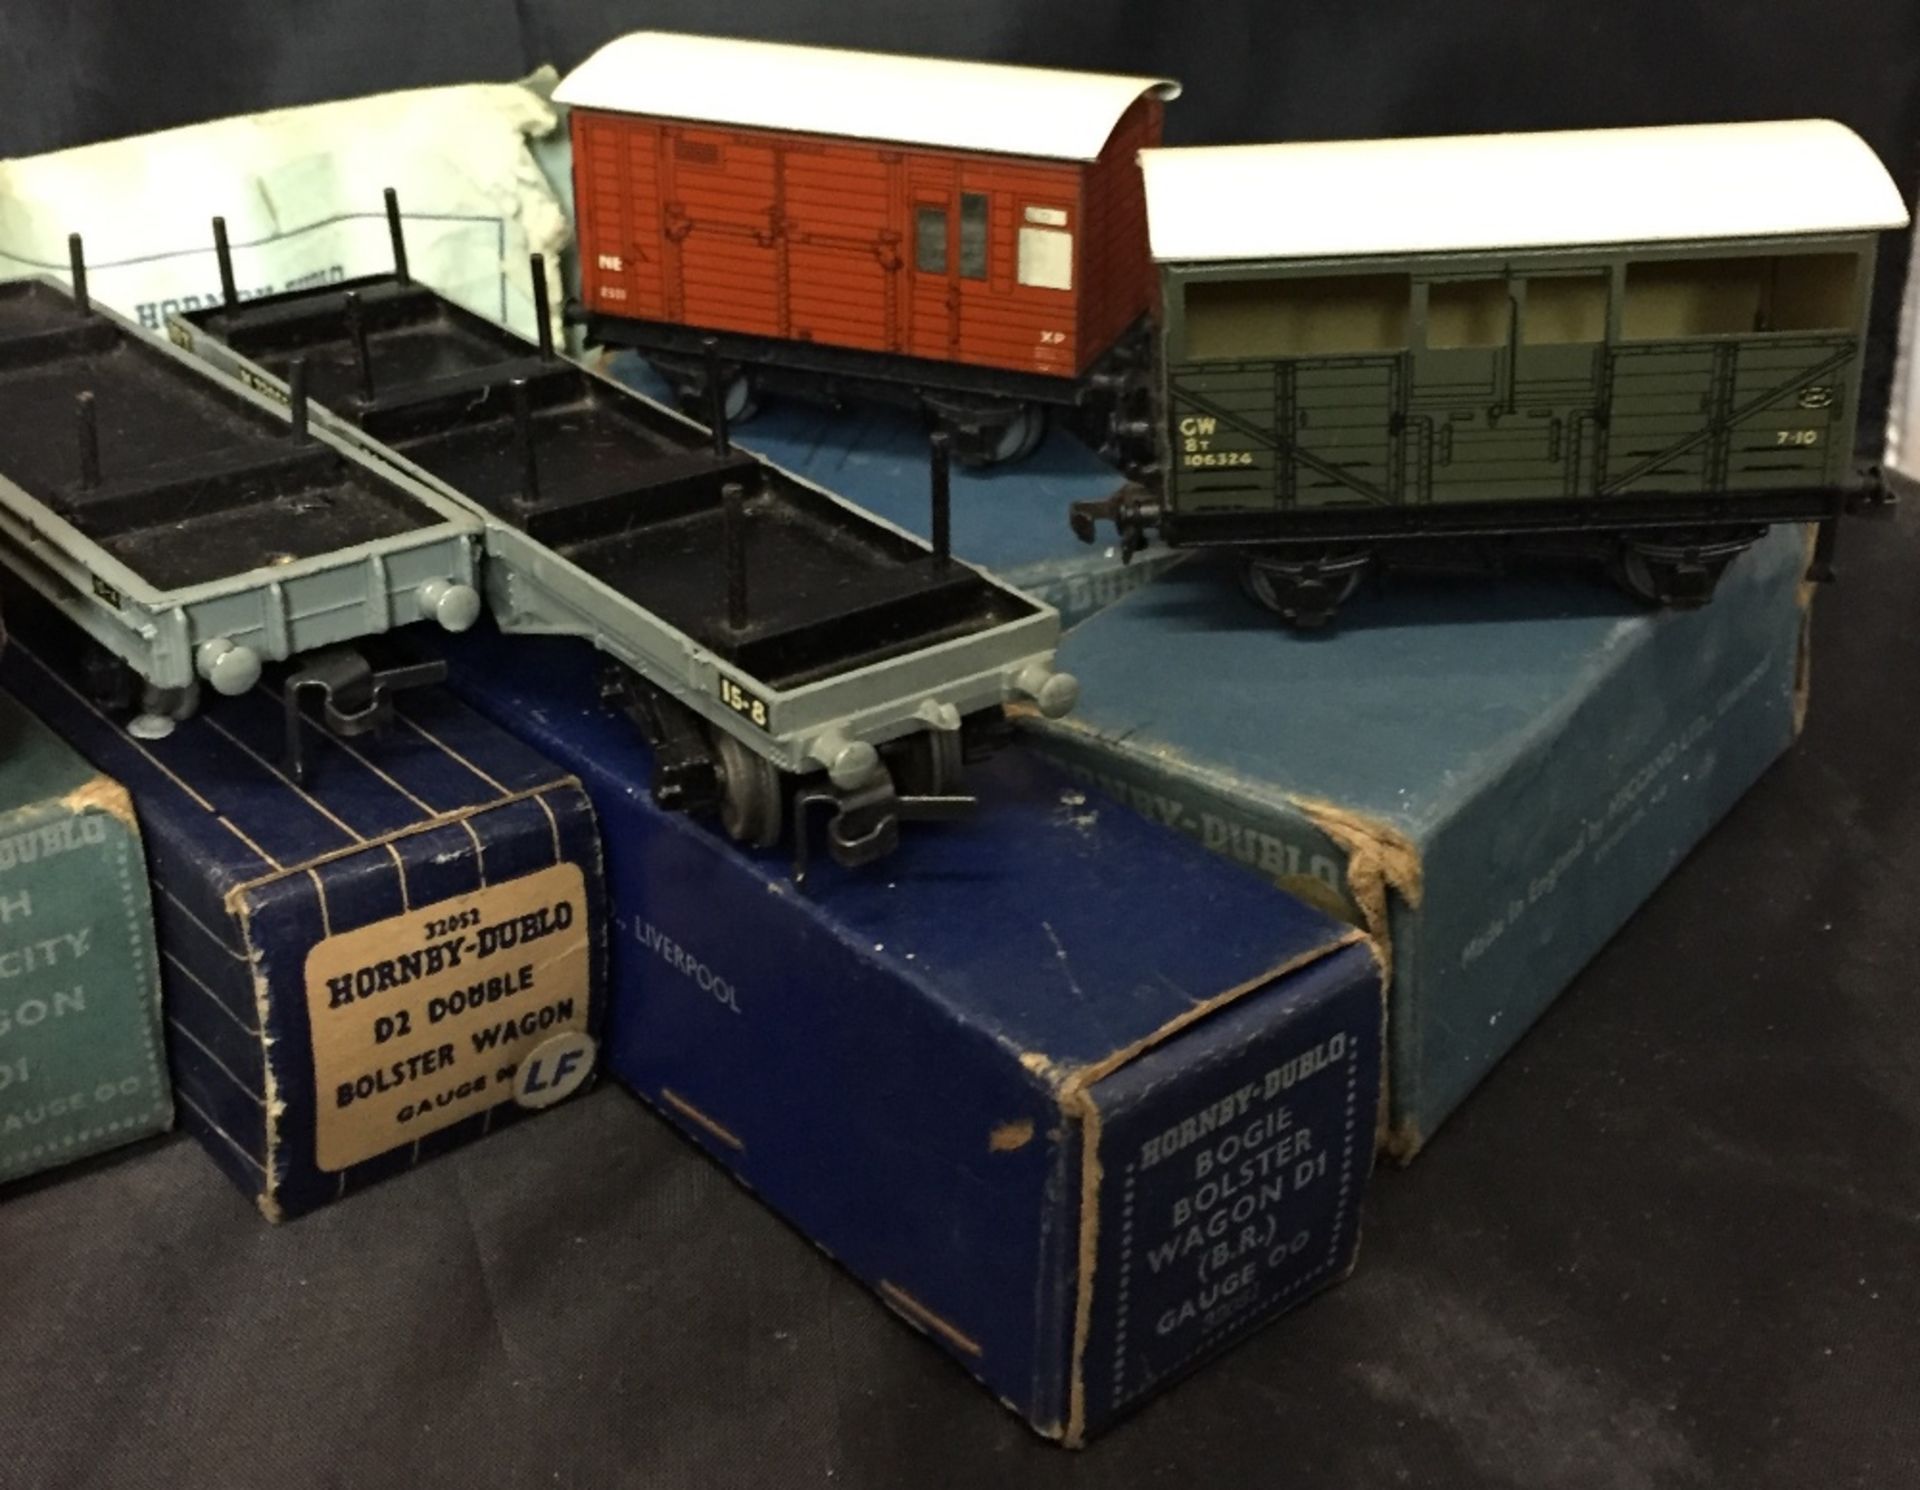 Eight Meccano Hornby-Dublo '00' gauge good wagons/rolling stock all boxed - D1 cattle truck (DR371), - Image 3 of 3